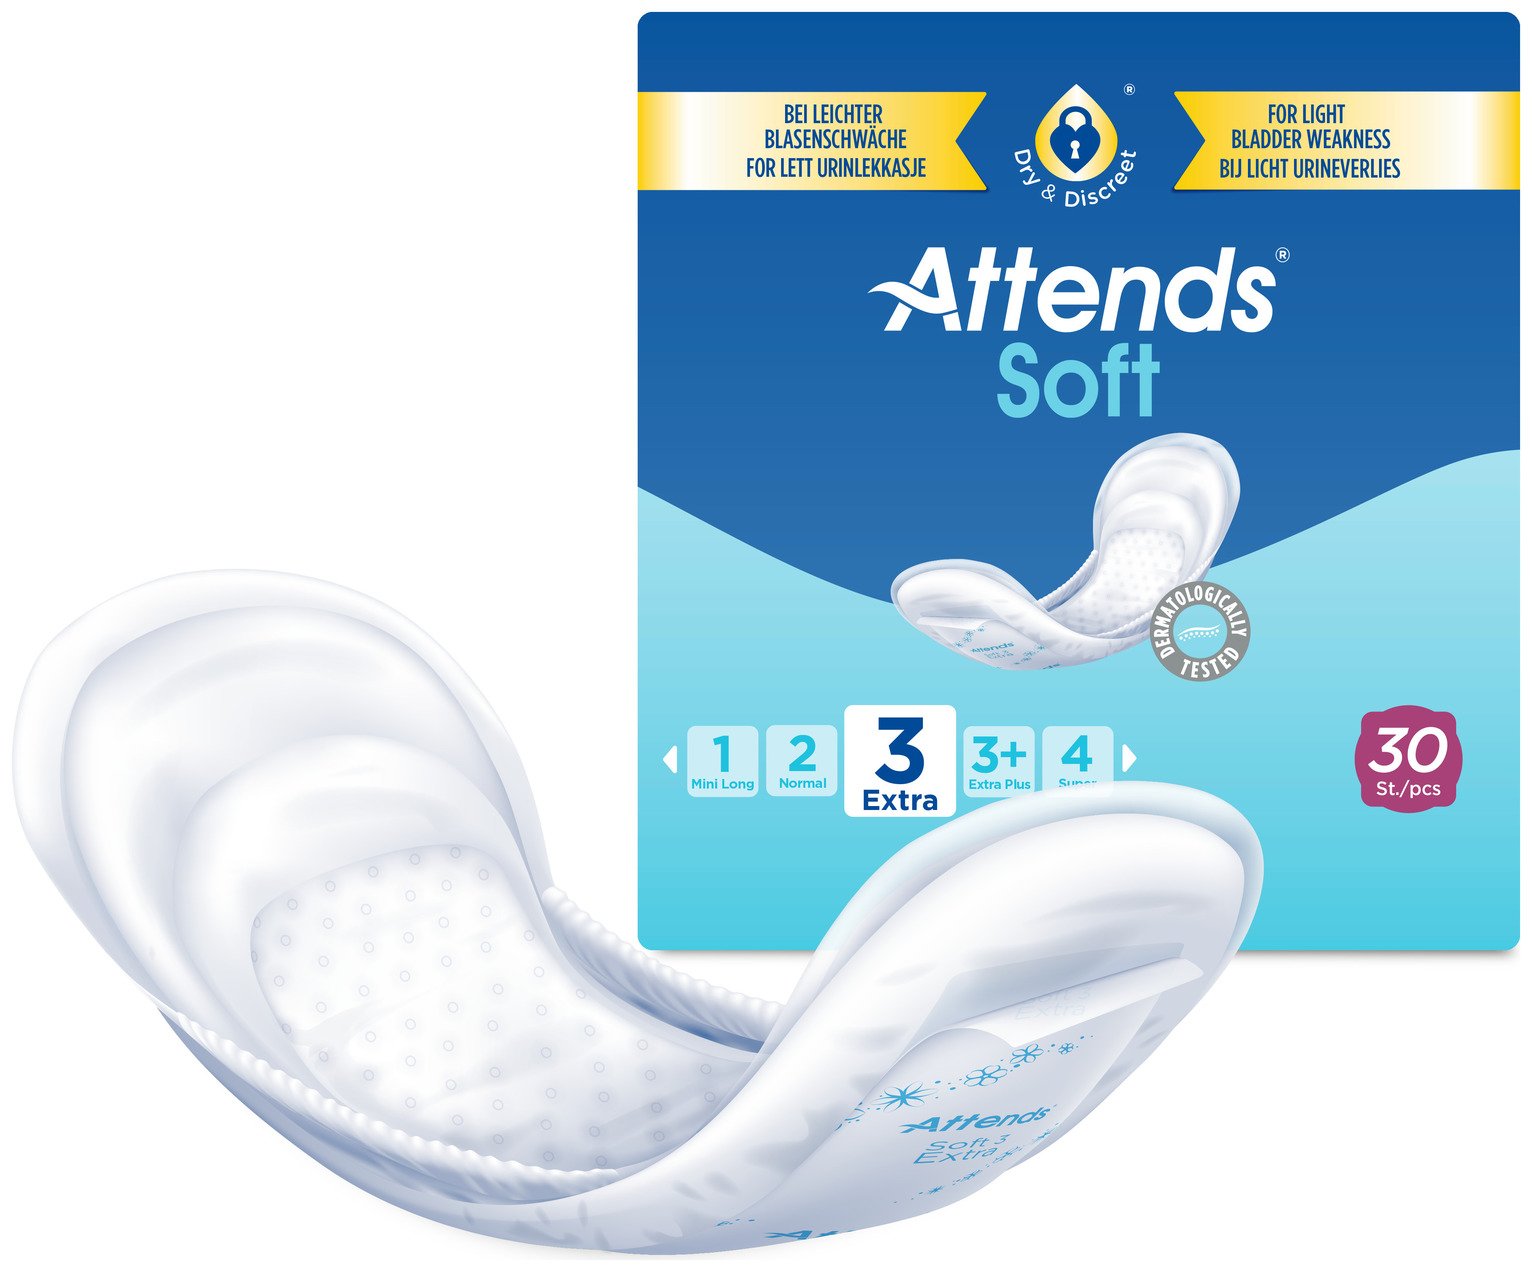 Attends Soft 3 Extra - 240 Pads